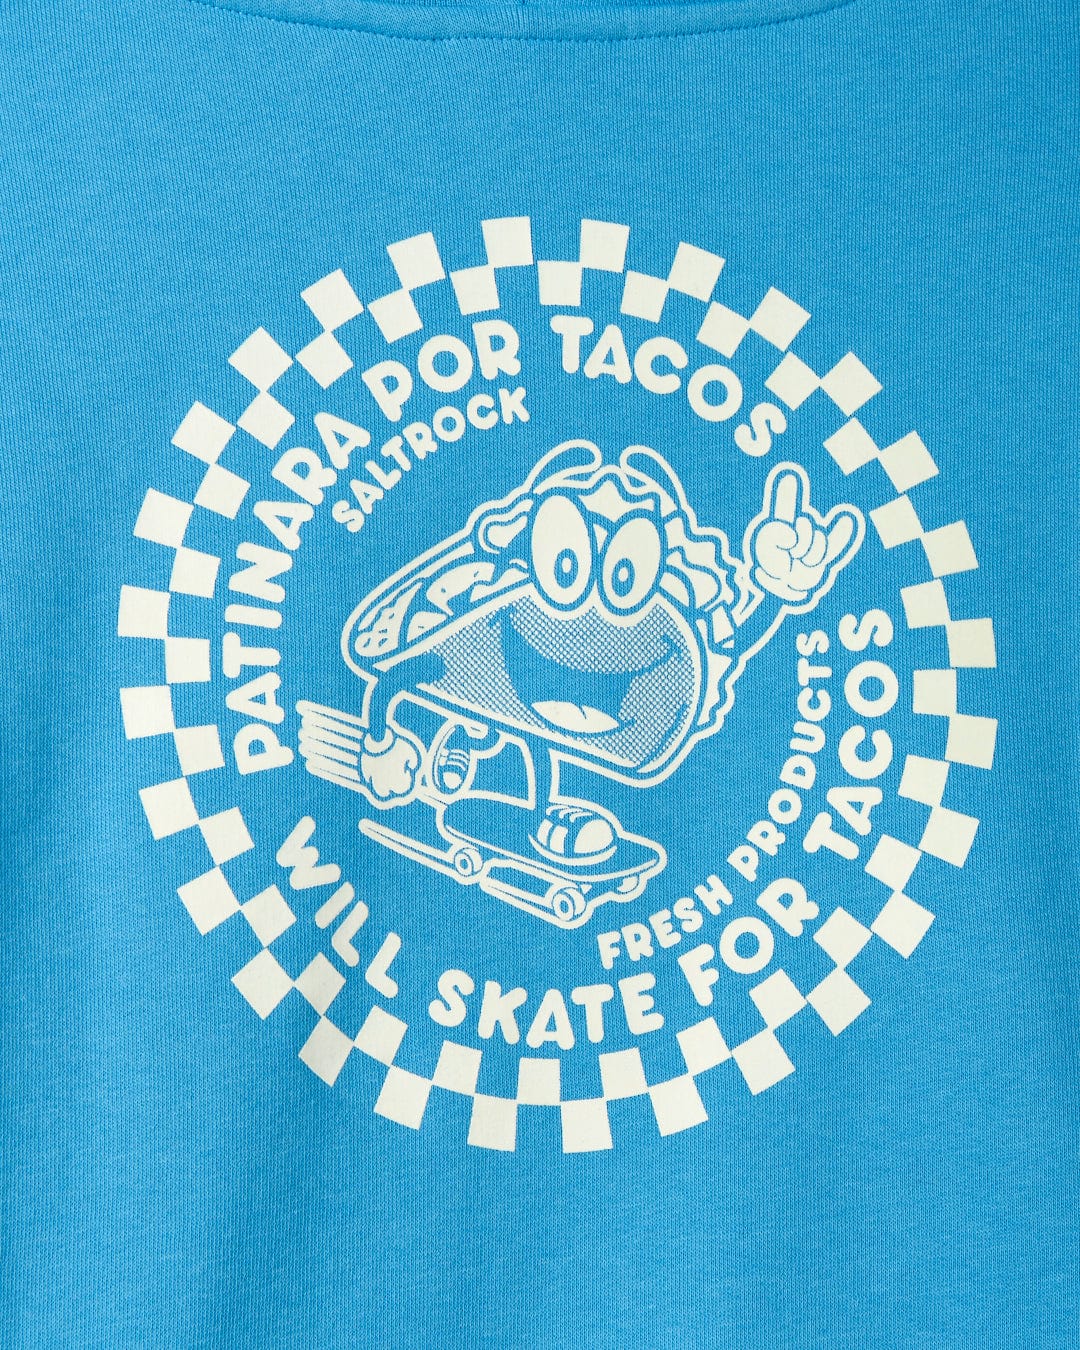 Blue Taco Tok - Recycled Kids Pop Hoodie design featuring a cartoon frog on a skateboard, encircled by text "patinar por tacos - will skate for tacos", enhanced with Saltrock graphics.